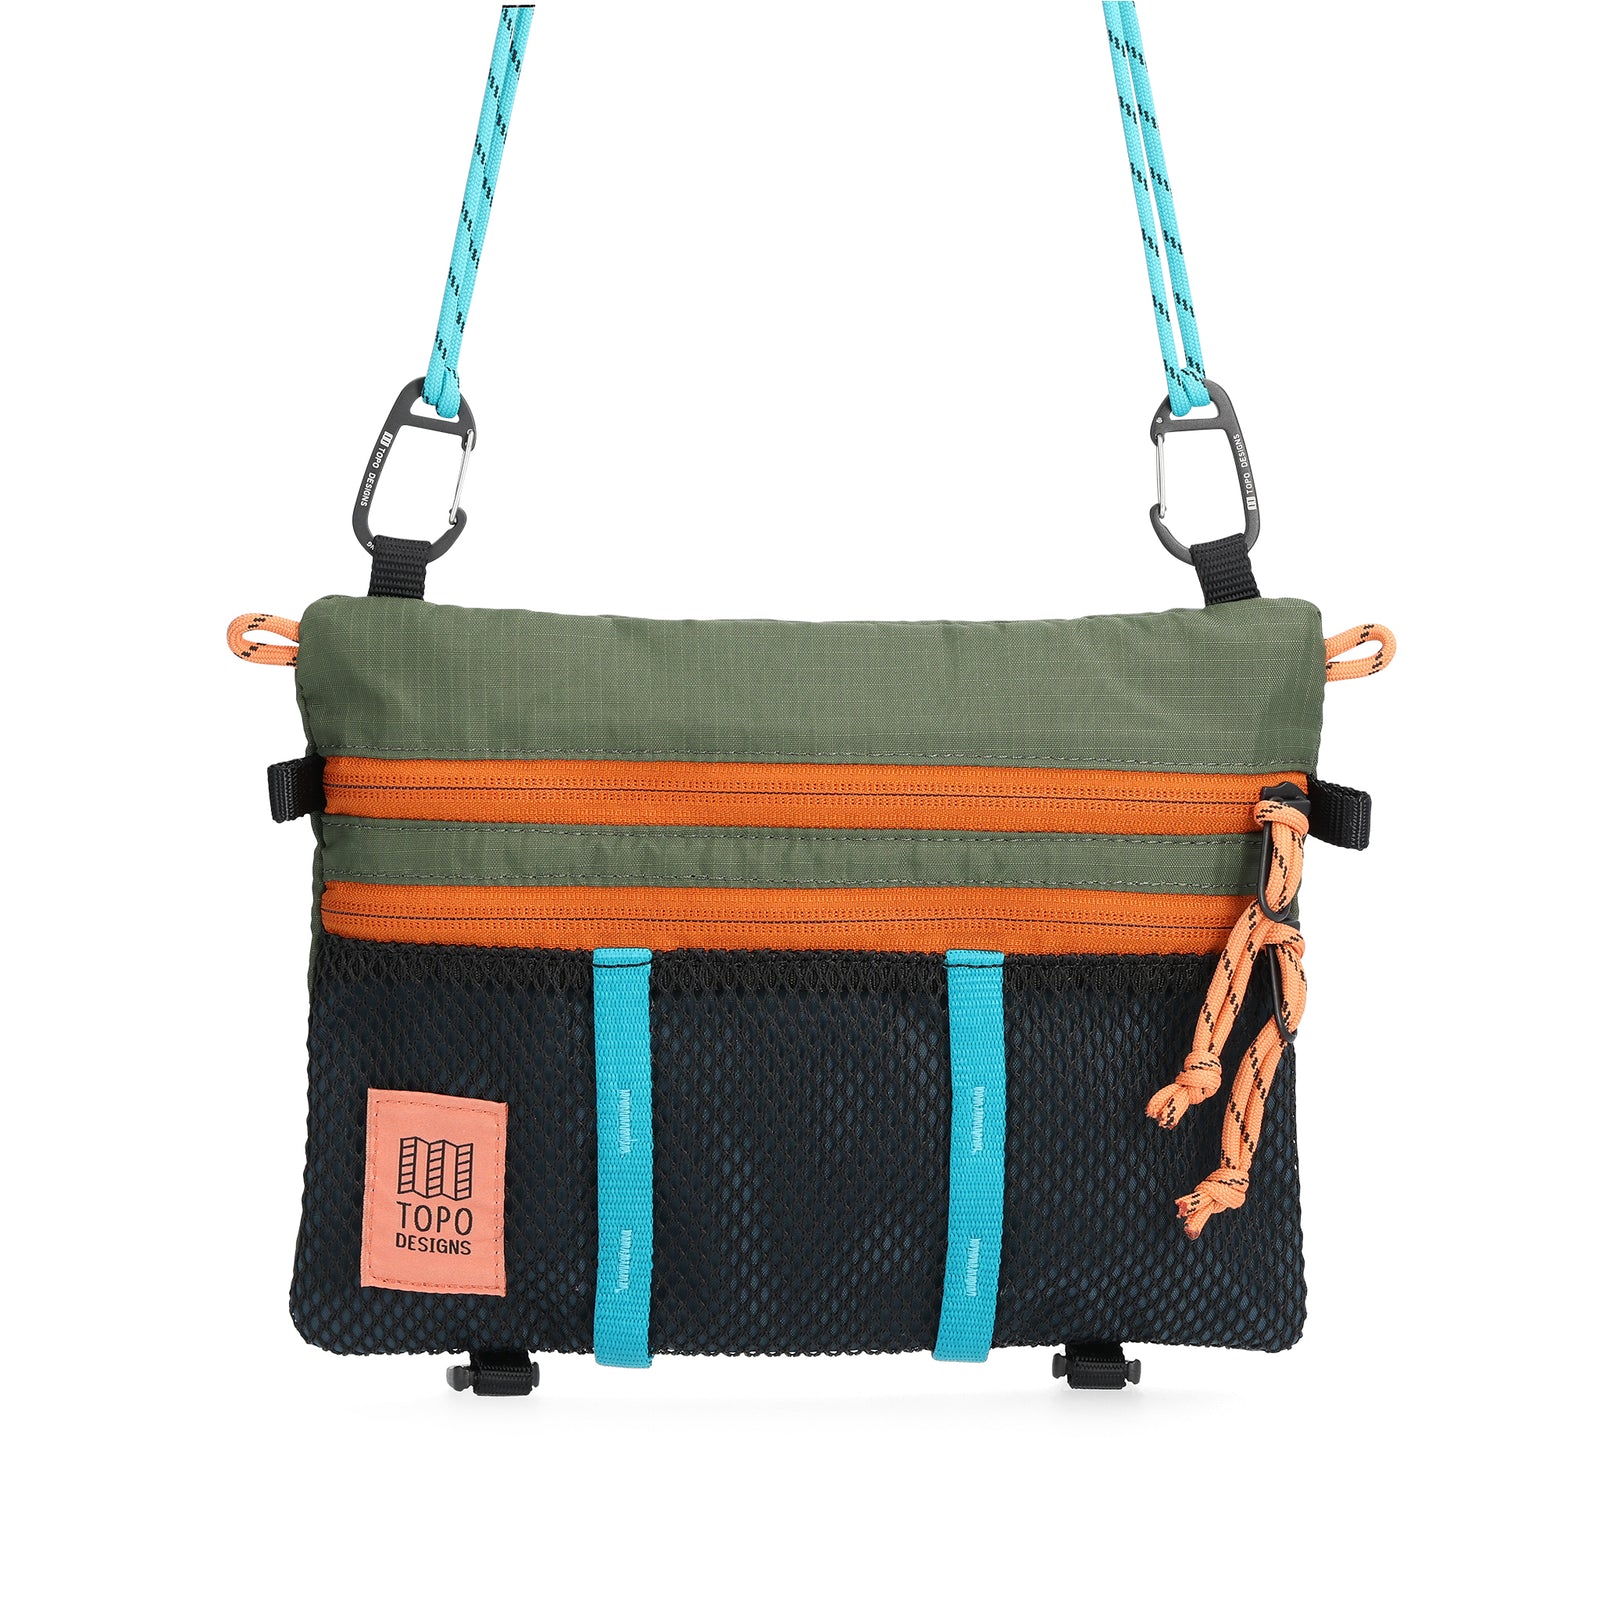 Front View of Topo Designs Mountain Accessory Shoulder Bag in "Olive / Pond Blue"